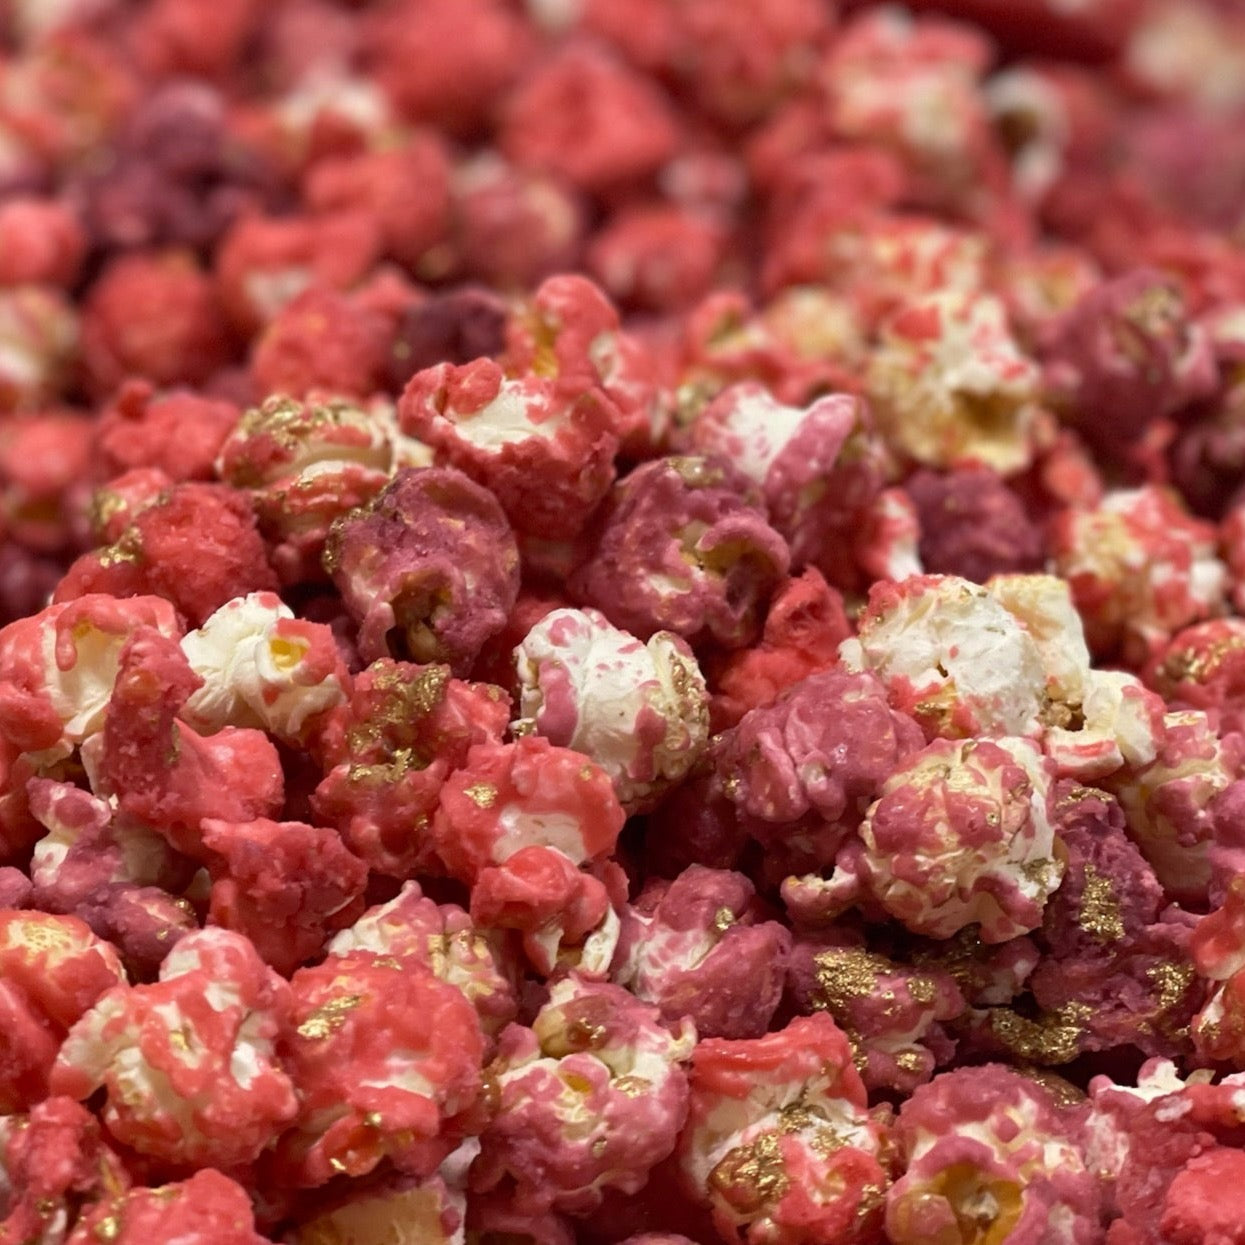 Classic Candied Popcorn